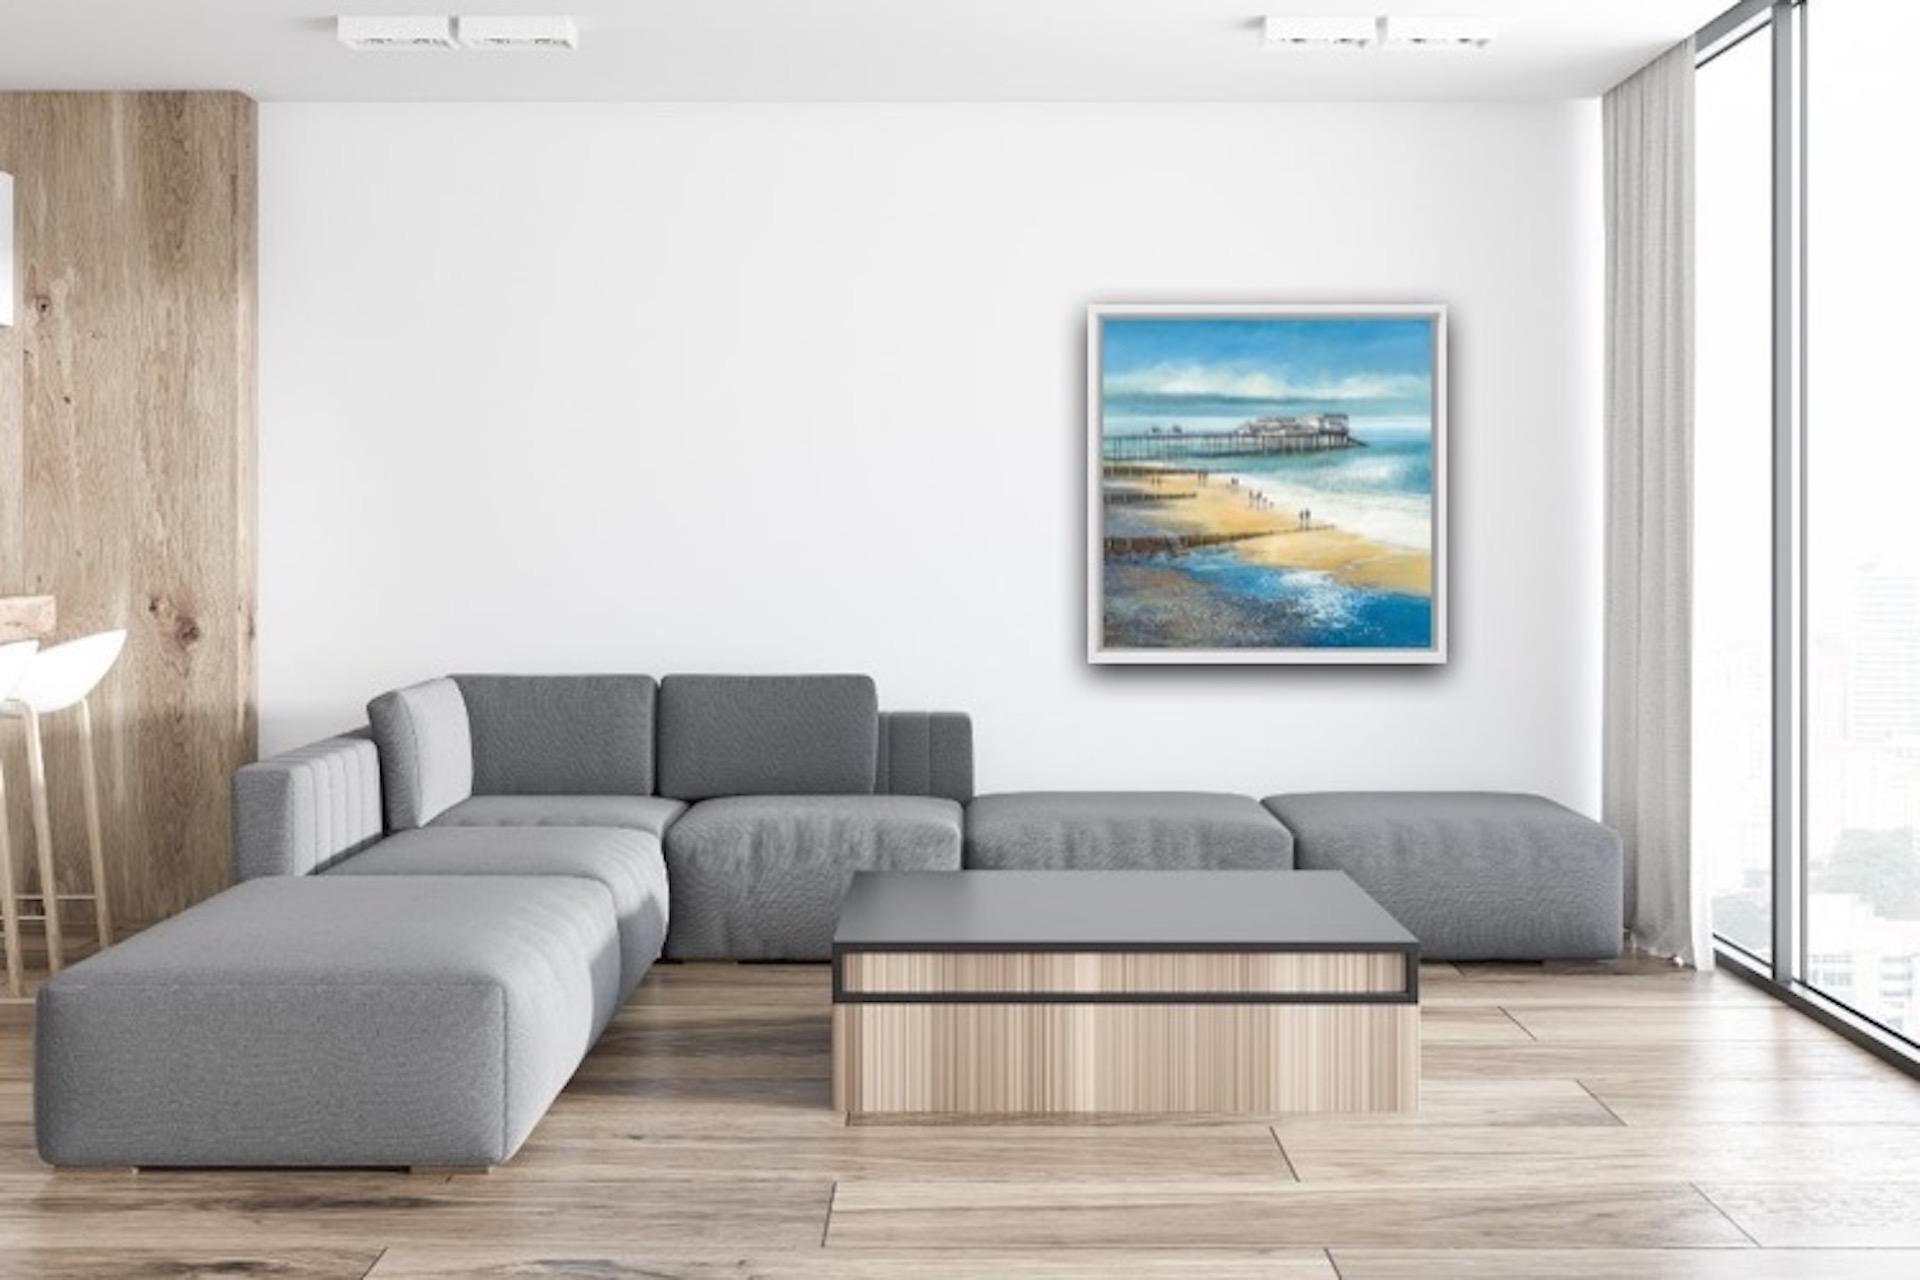 Michael Sanders
Sunday Afternoon, Cromer – Large Canvas Print
Limited Edition Giclee Print on Canvas
Edition of 50
Canvas Size: H 80cm x W 80cm 
Sold Unframed
Please note that insitu images are purely an indication of how a piece may look

Sunday